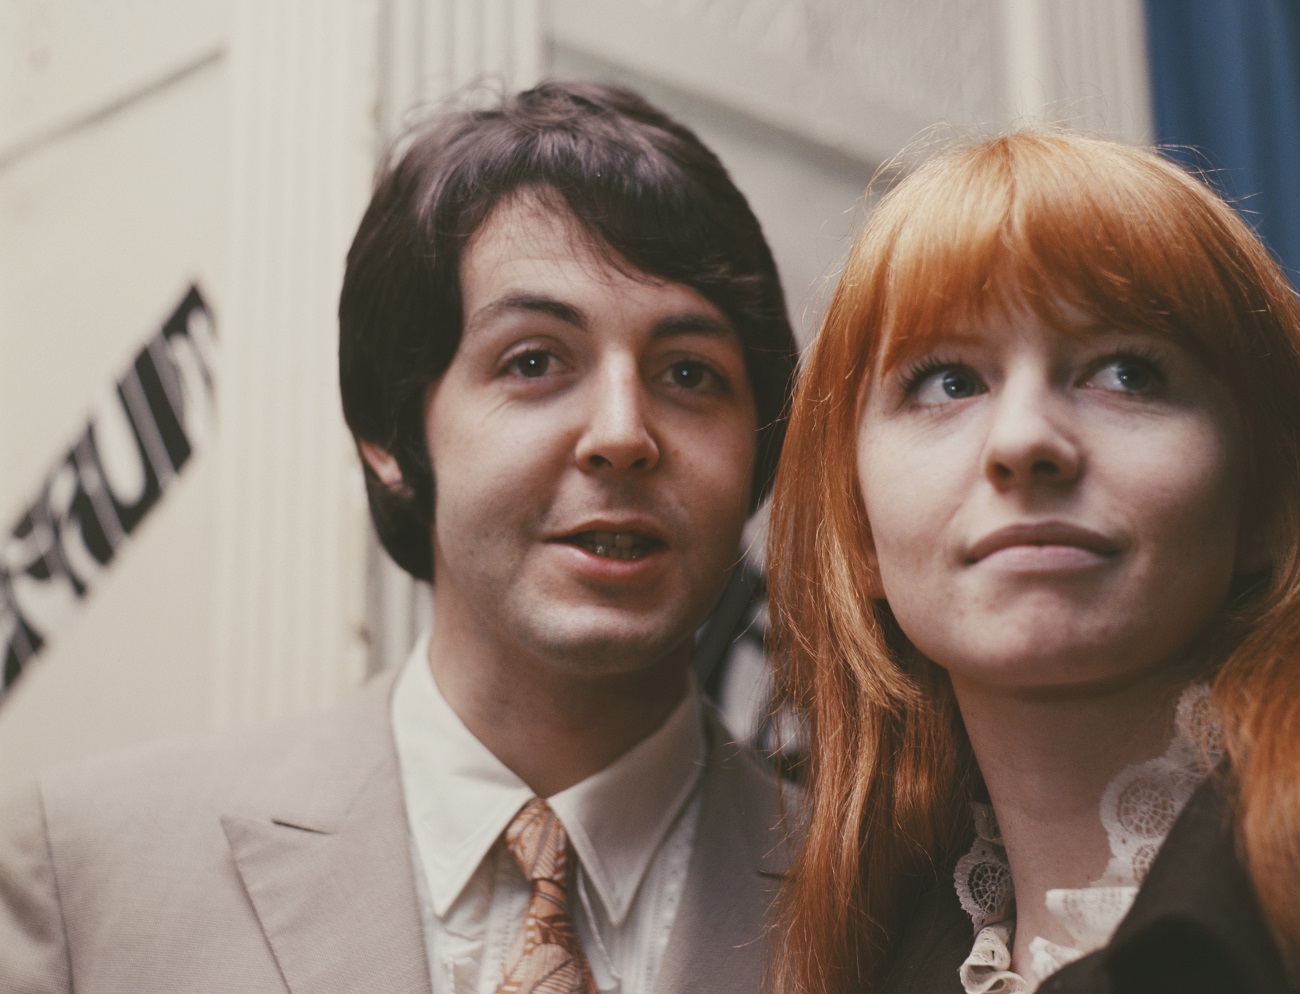 Paul McCartney wears a suit and stands next to Jane Asher, who wears a lace collar.